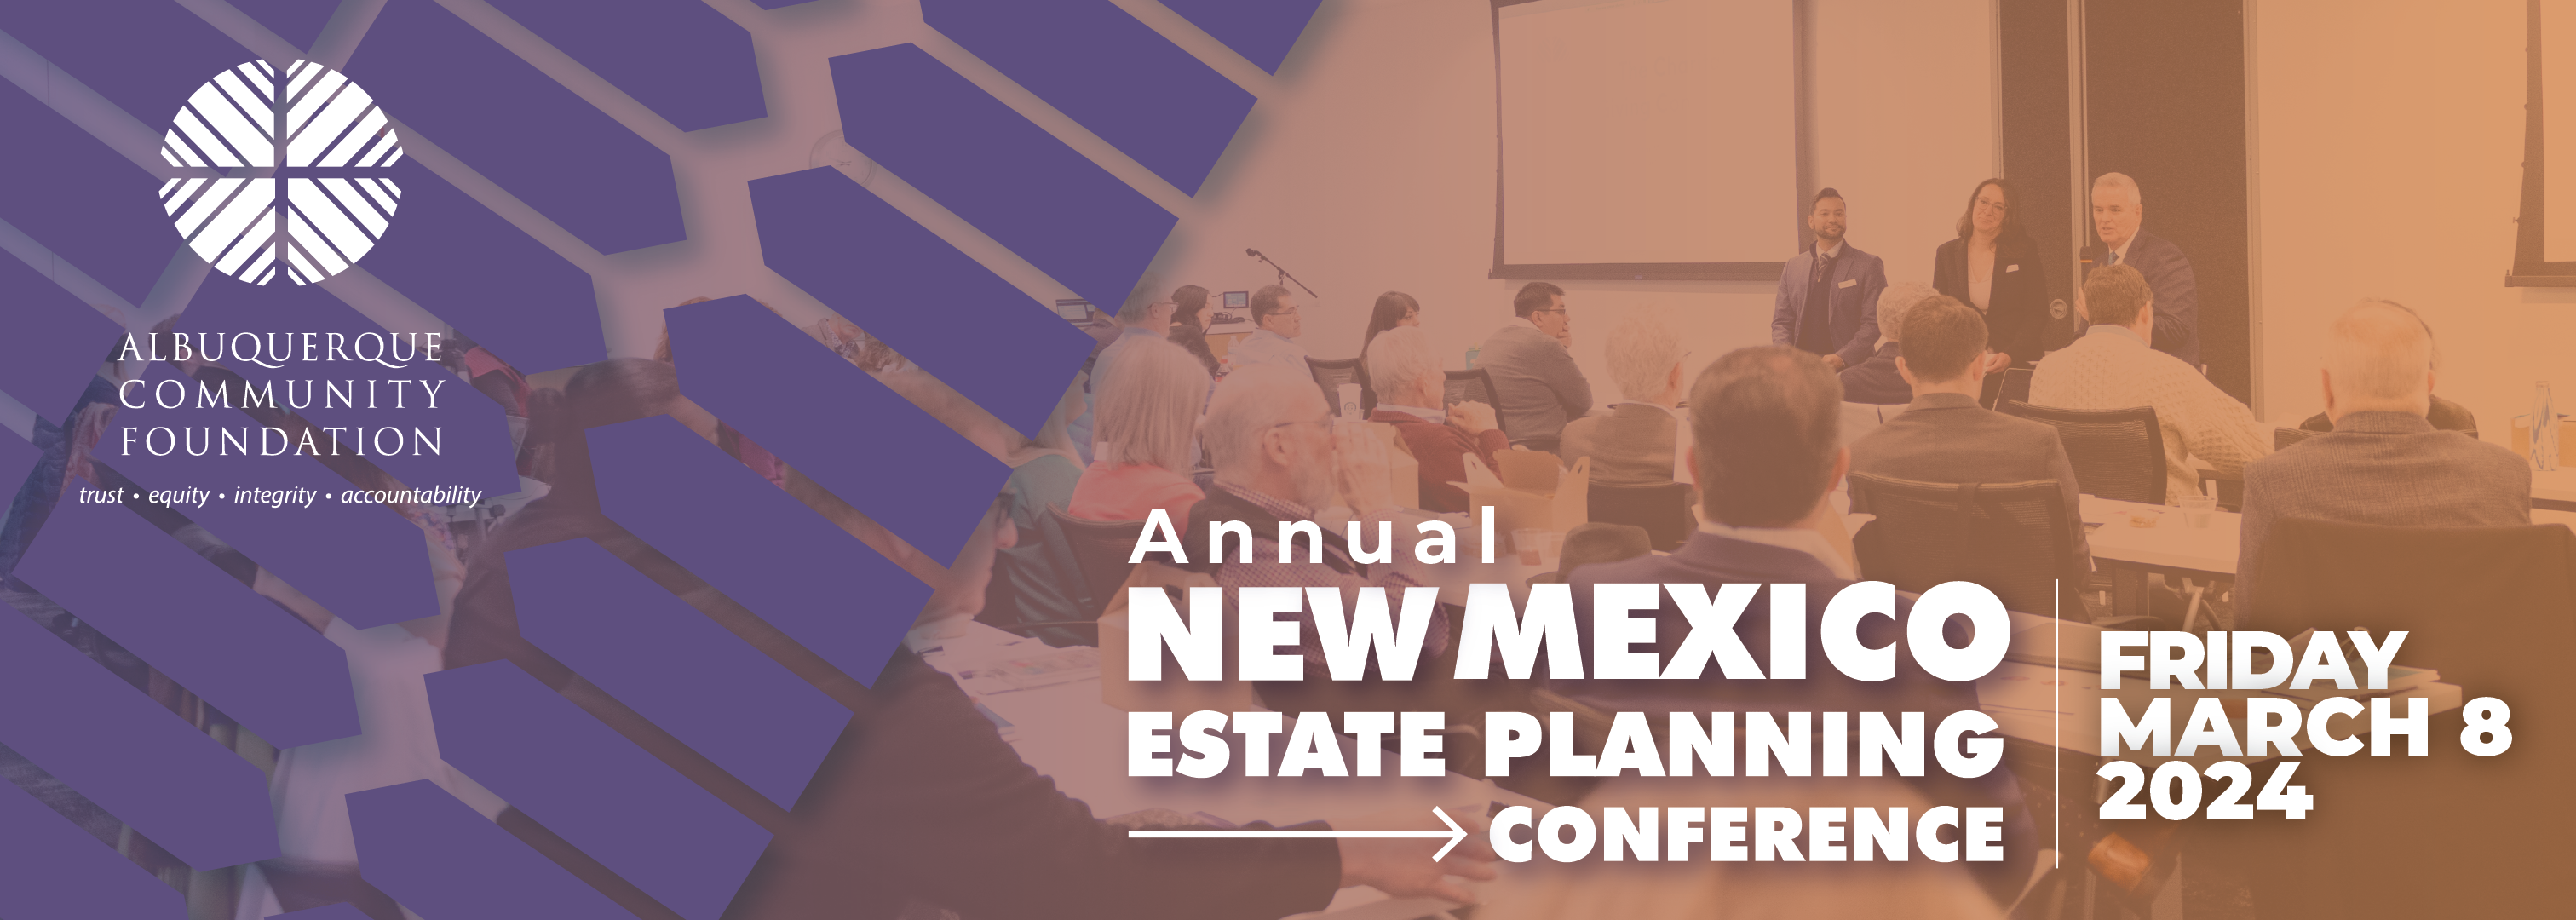 New Mexico Estate Planning Conference February 25